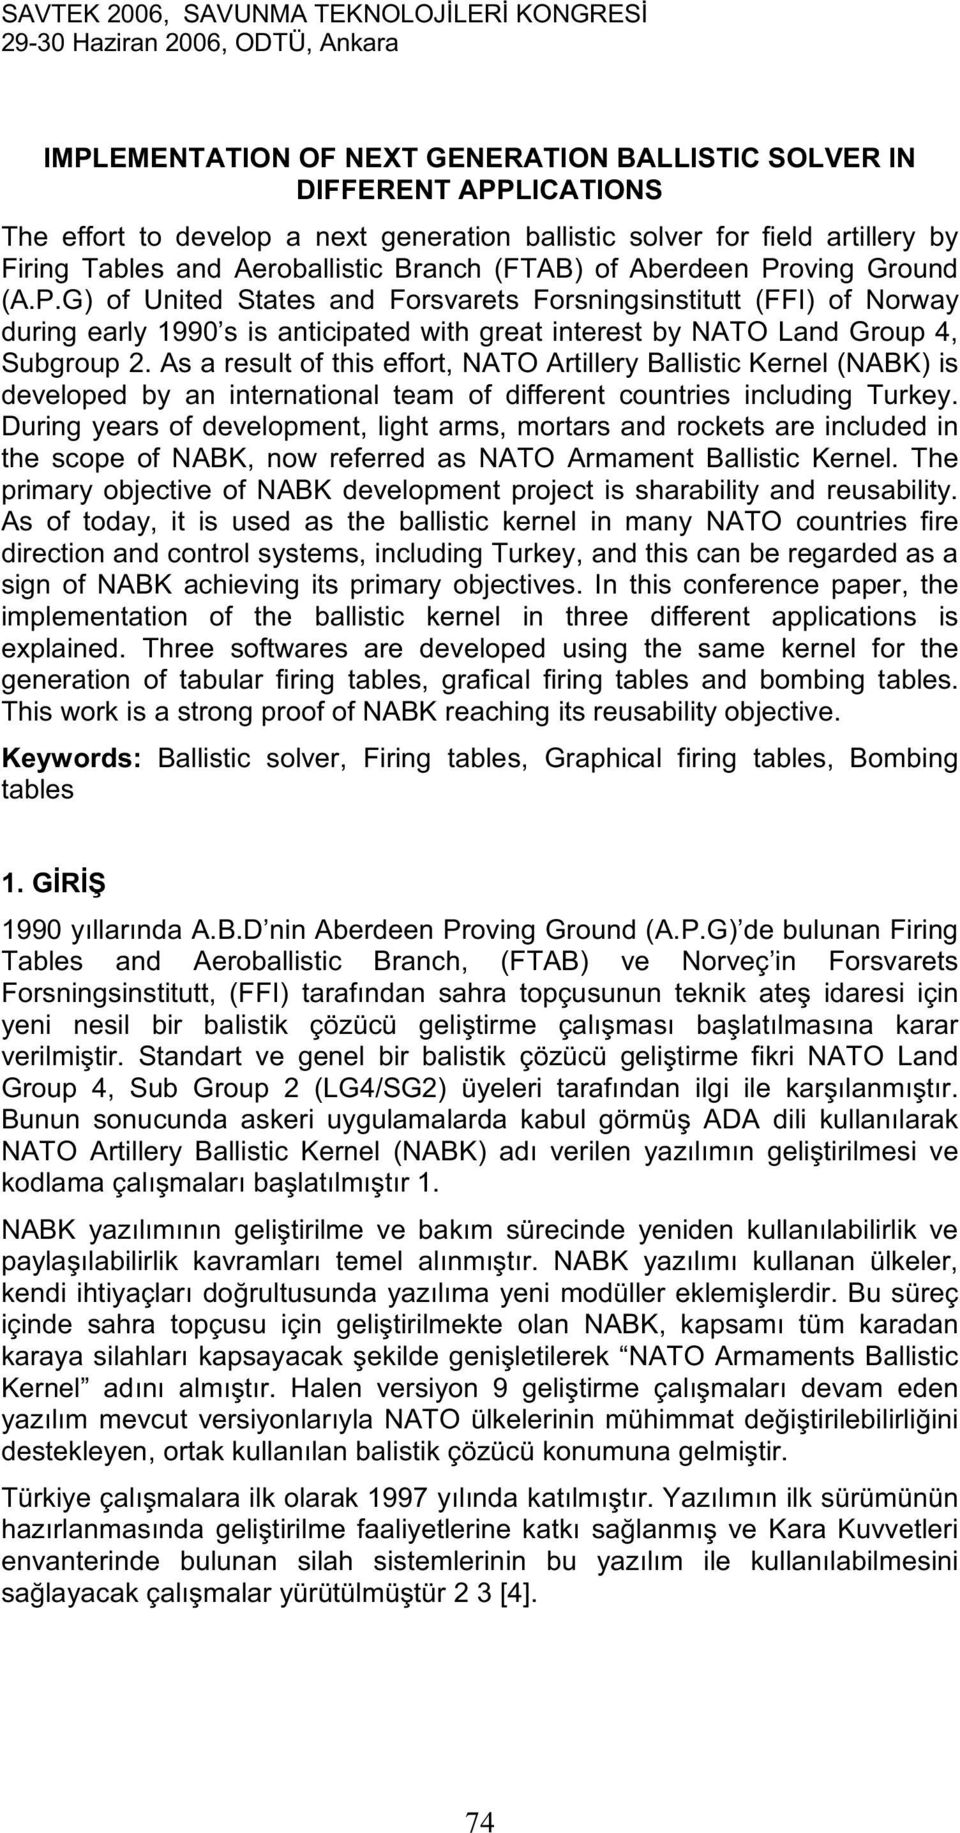 As a result of this effort, NATO Artillery Ballistic Kernel (NABK) is developed by an international team of different countries including Turkey.